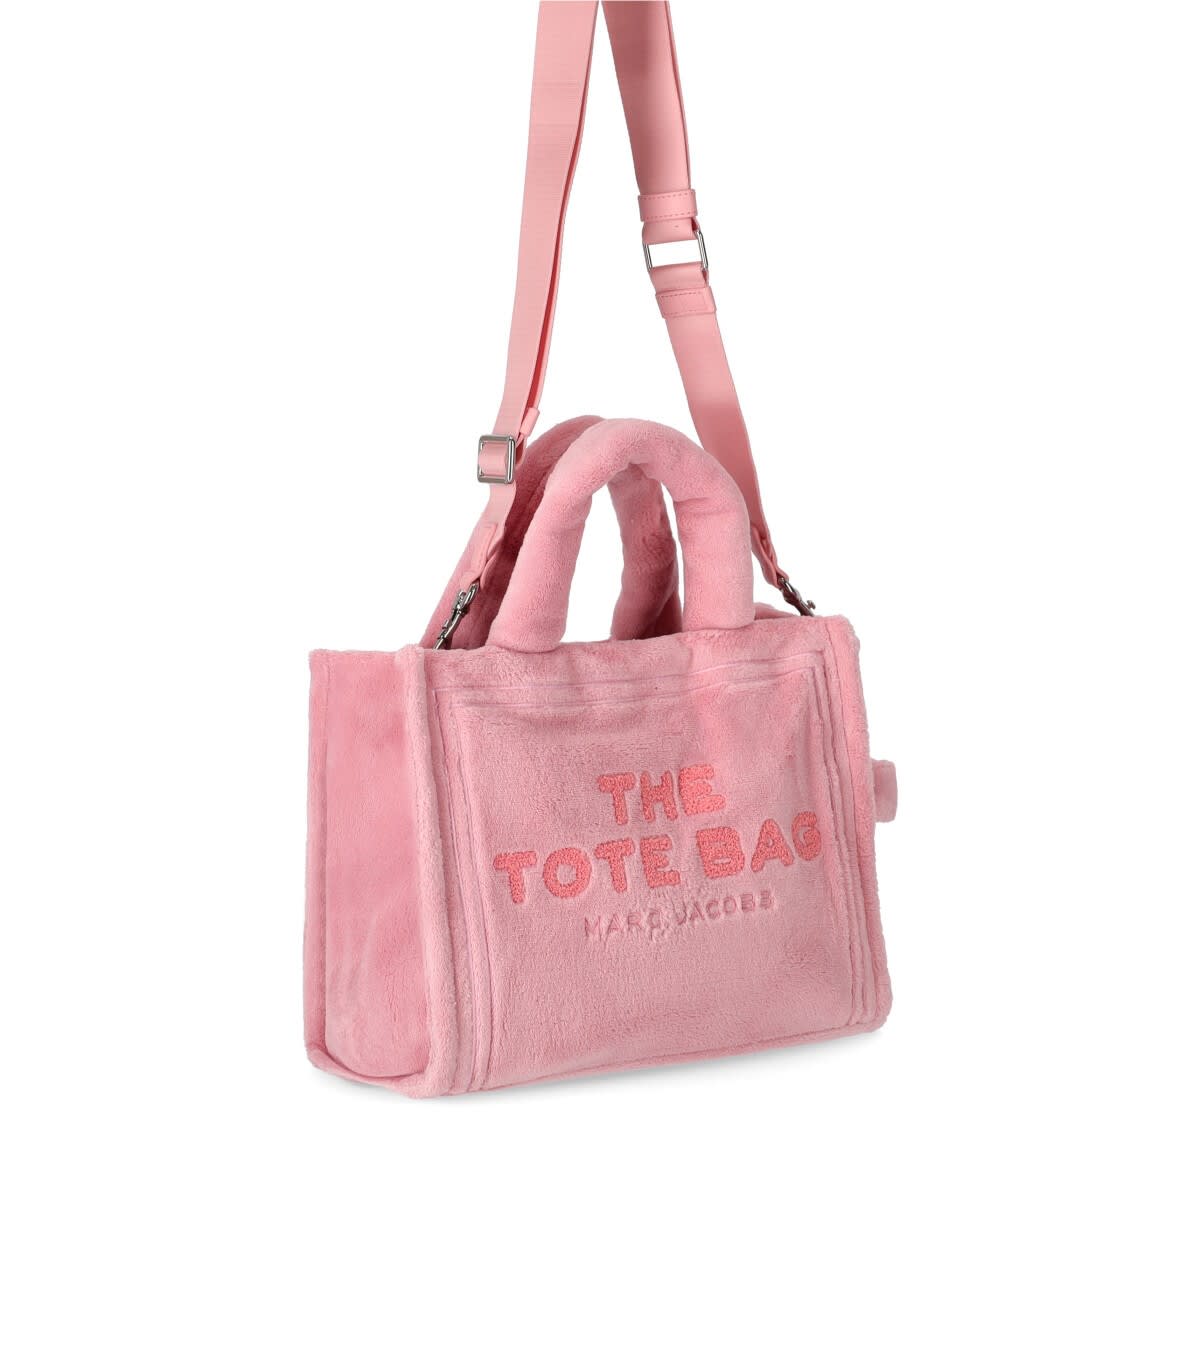 Marc Jacobs the terry small tote bag Pink - $475 (13% Off Retail